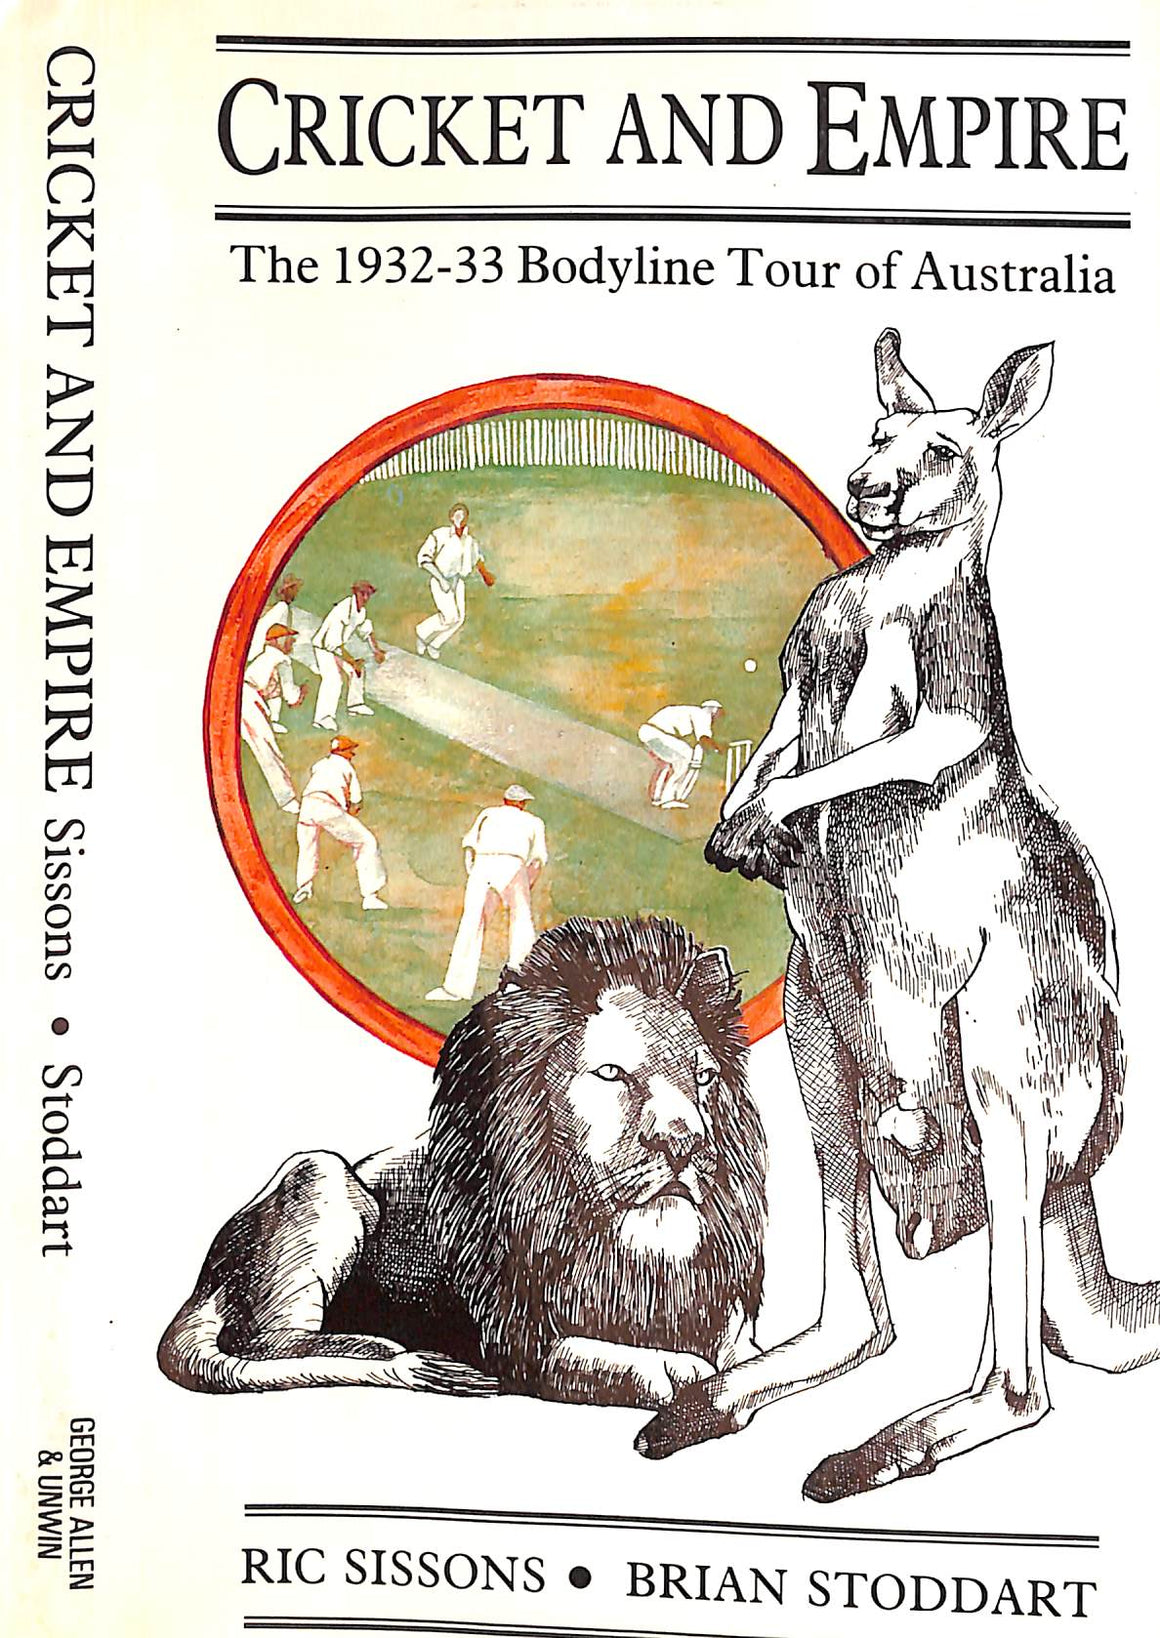 "Cricket And Empire: The 1932-33 Bodyline Tour Of Australia" 1984 STODDART, Brian, SISSONS, Ric